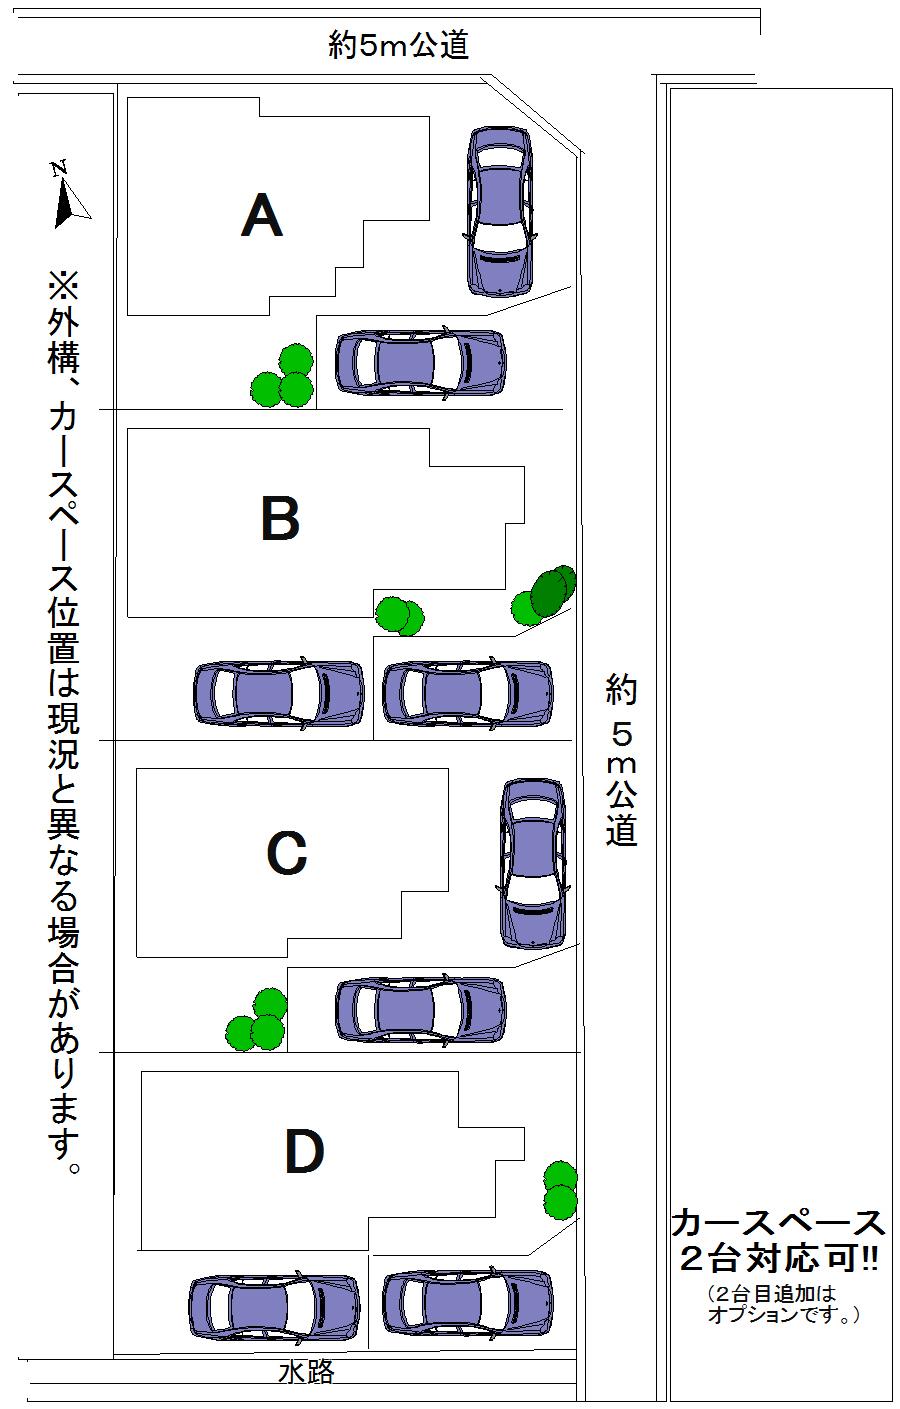 The entire compartment Figure. Car space two corresponding Allowed